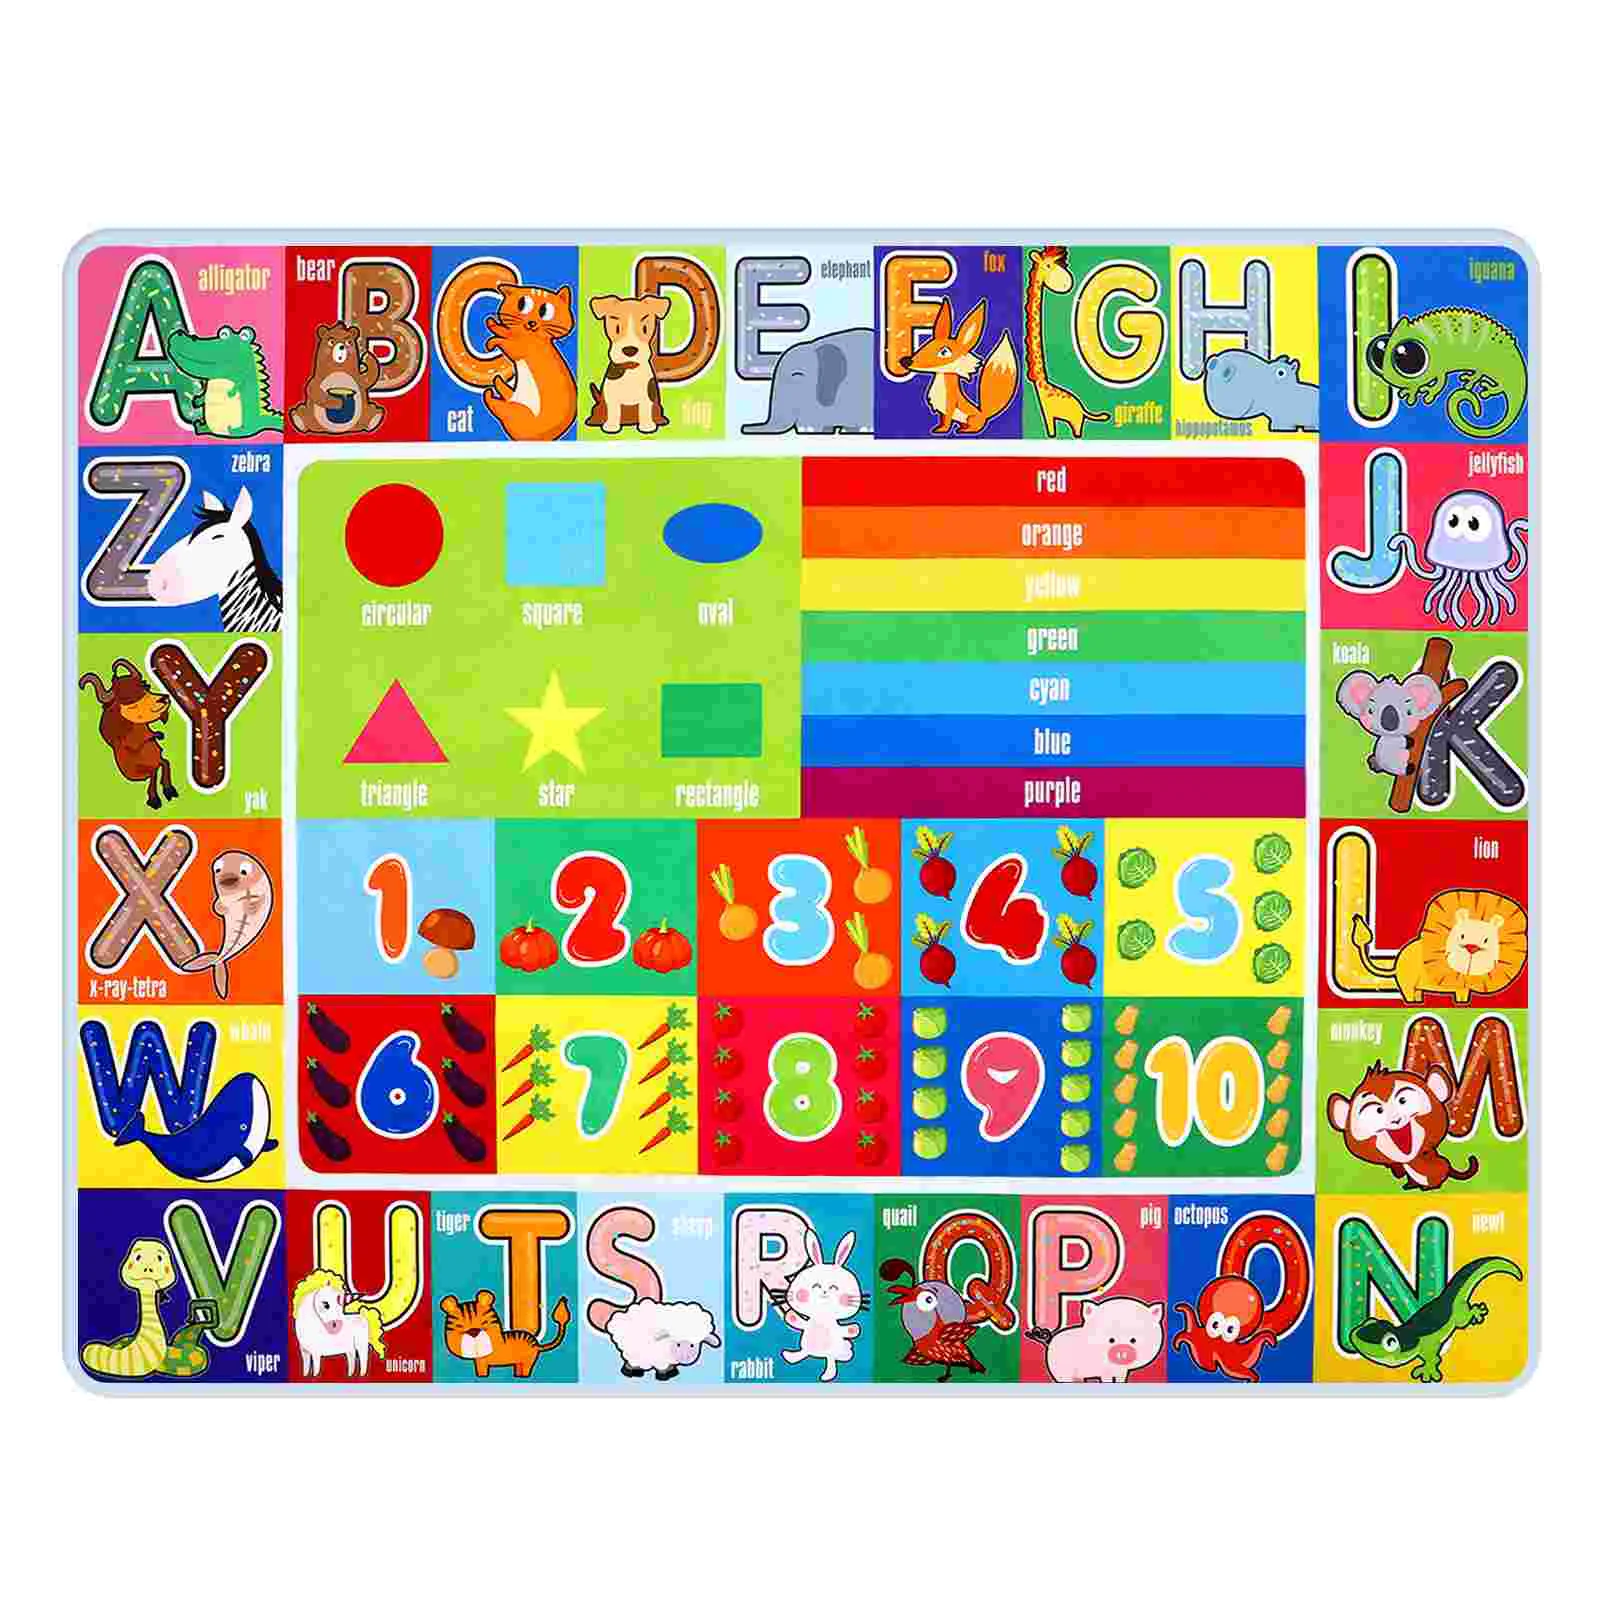 

IMIKEYA Kids Floor Mat Letters & Numbers & Graphics Floor Pad Sponge Kids Play Mat Early Educational Learning Mat for Kids